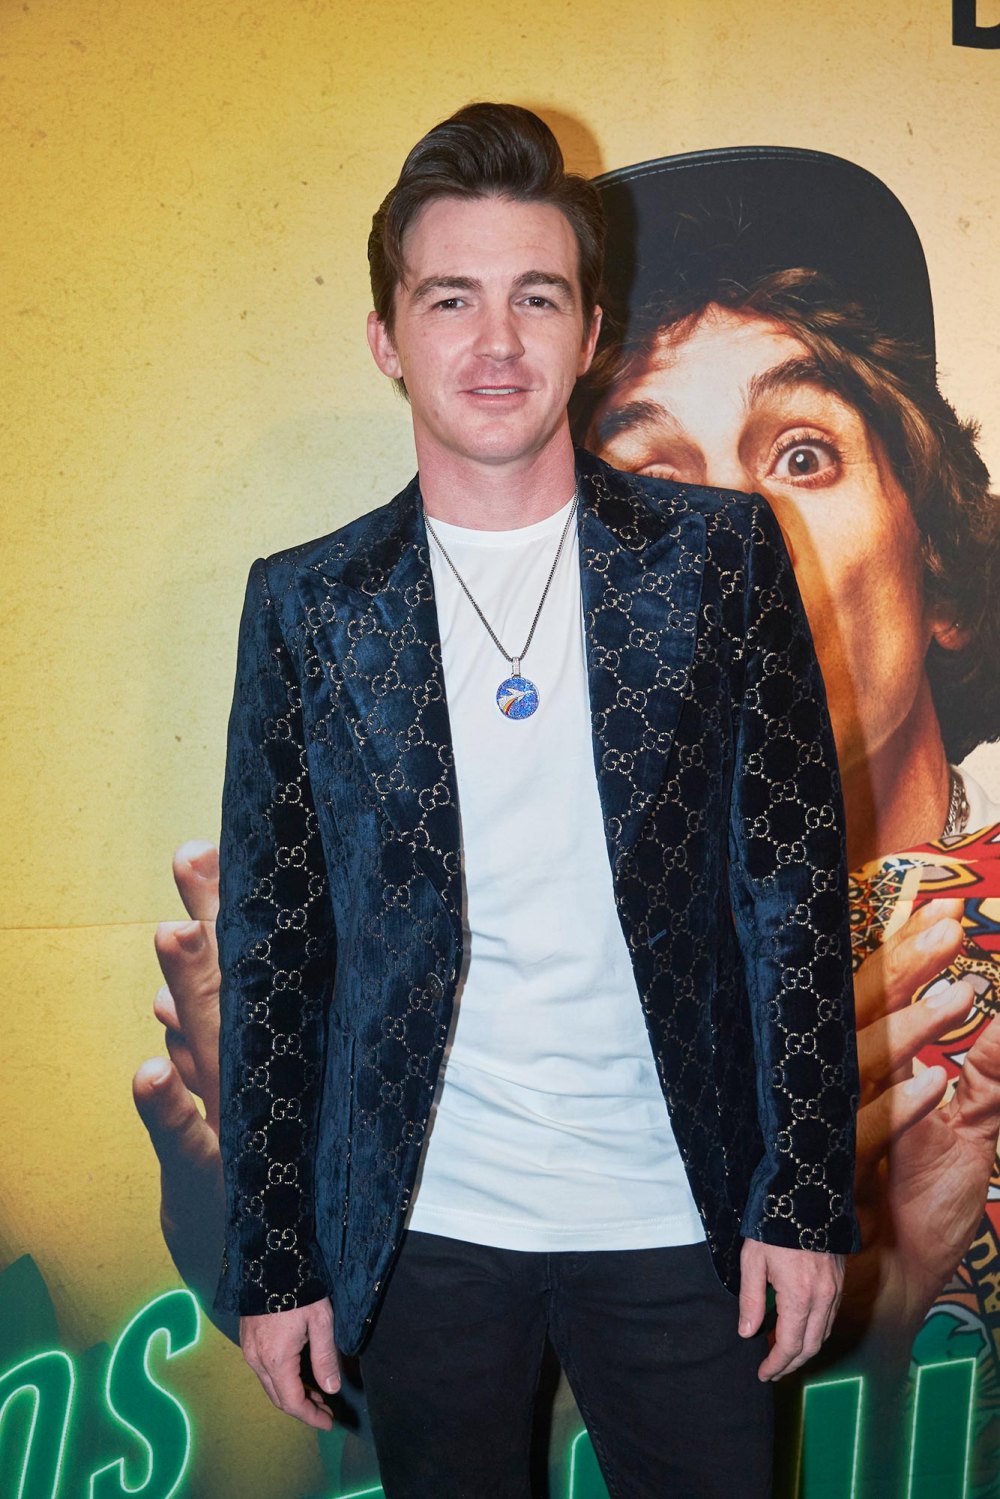 Drake Bell Credits Music for Helping His Healing After Personal Challenges